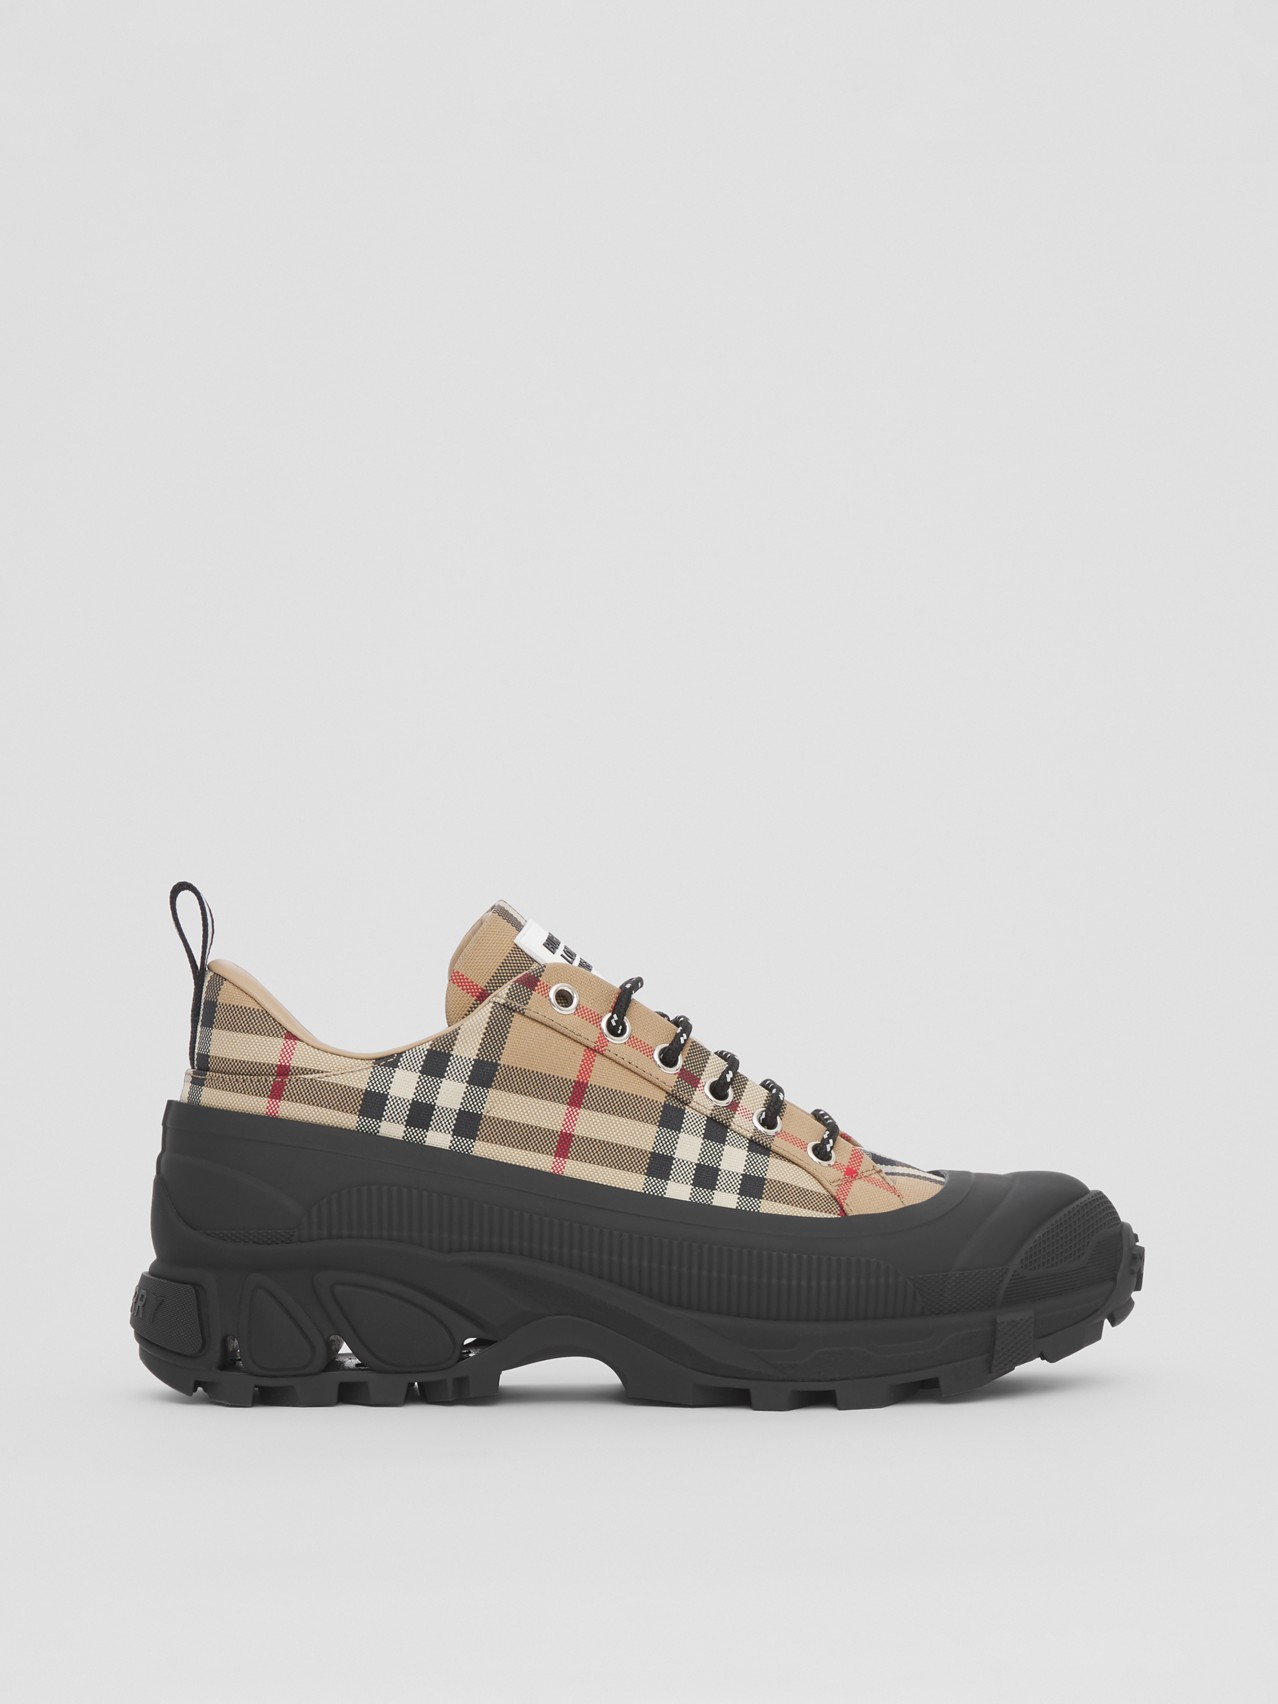 Vintage Check Cotton Arthur Sneakers by Burberry, available on burberry.com for $650 Bella Hadid Shoes SIMILAR PRODUCT